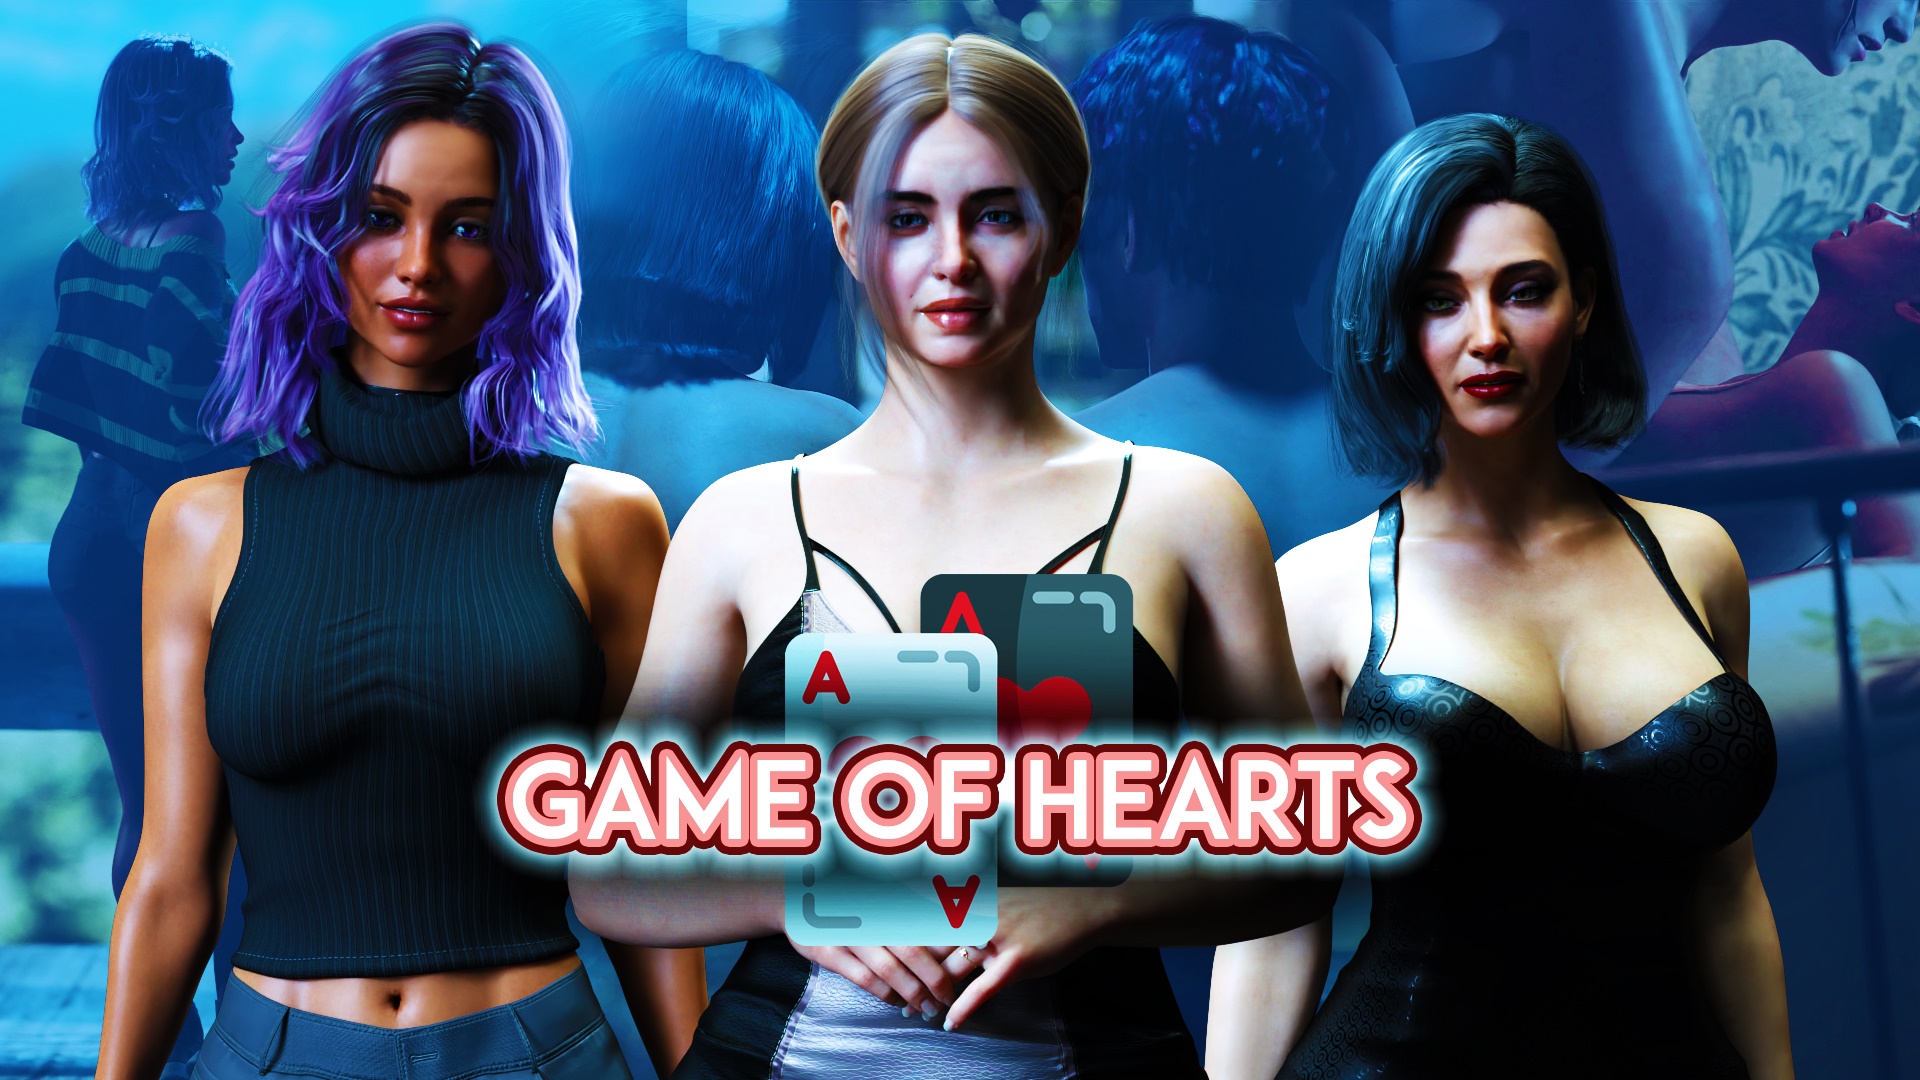 Download: Game of Hearts by SparkHG.